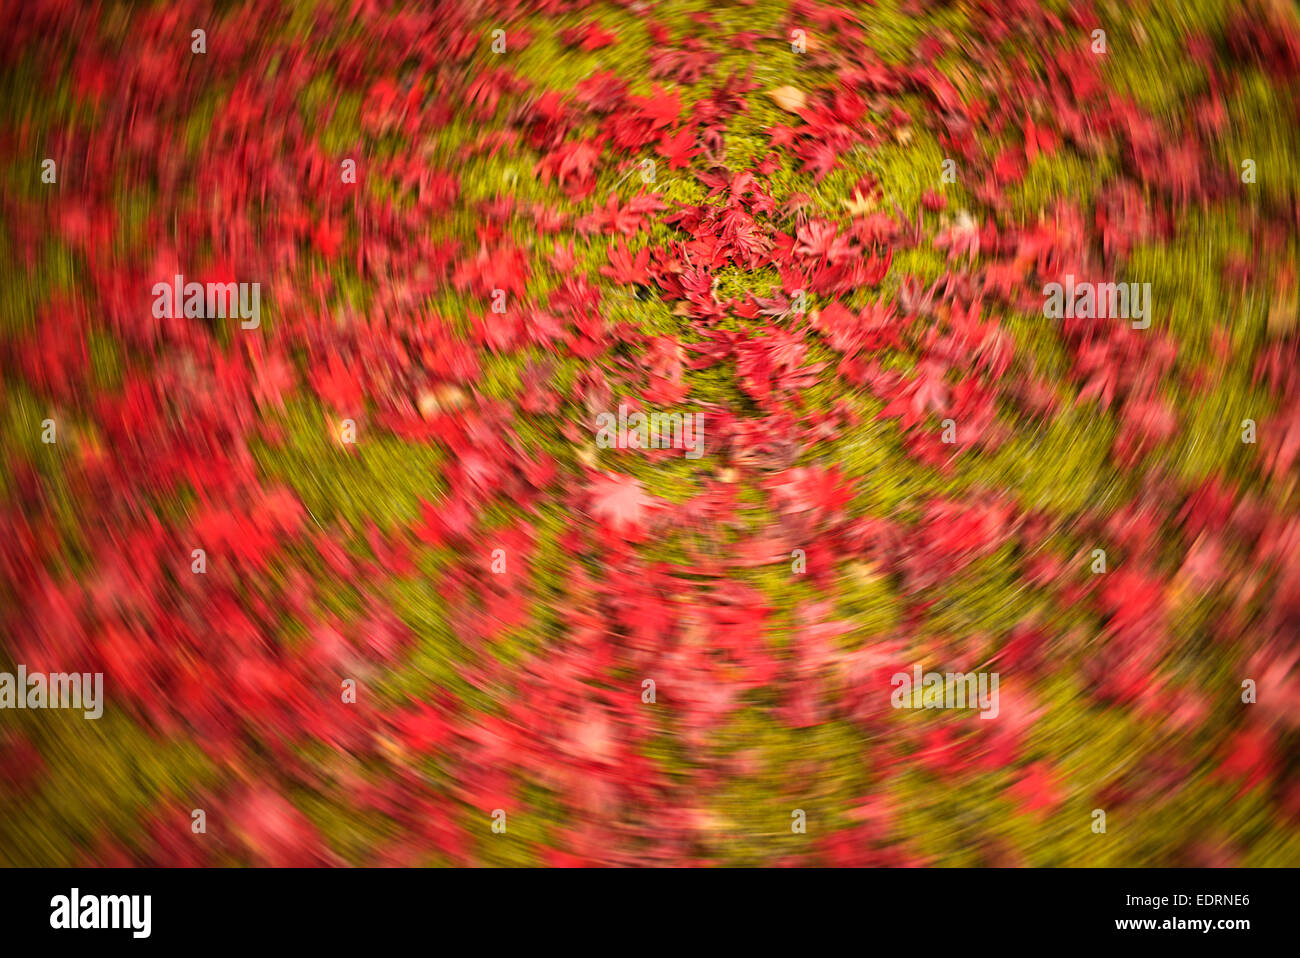 Carpet of autumn leaves in Japan swirling around. Stock Photo